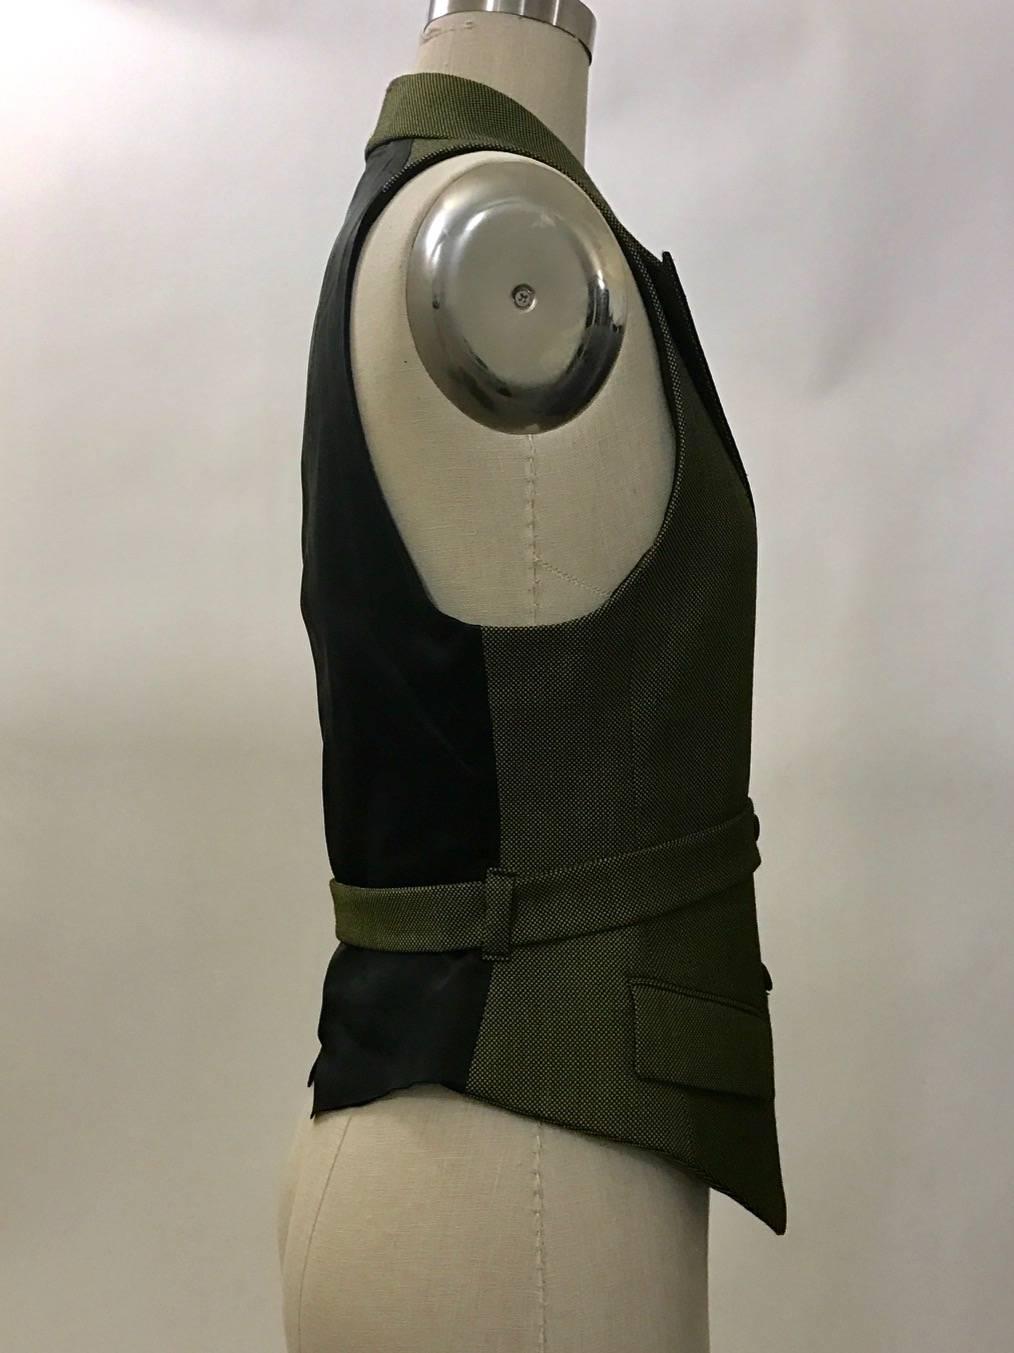 Alexander McQueen military inspired waistcoat vest in a yellow-green and black woven fabric with black satin back and collar. Attached belt wraps around the body and fastens at front buttons.  

Seen in the Fall 2001 What a Merry Go Round